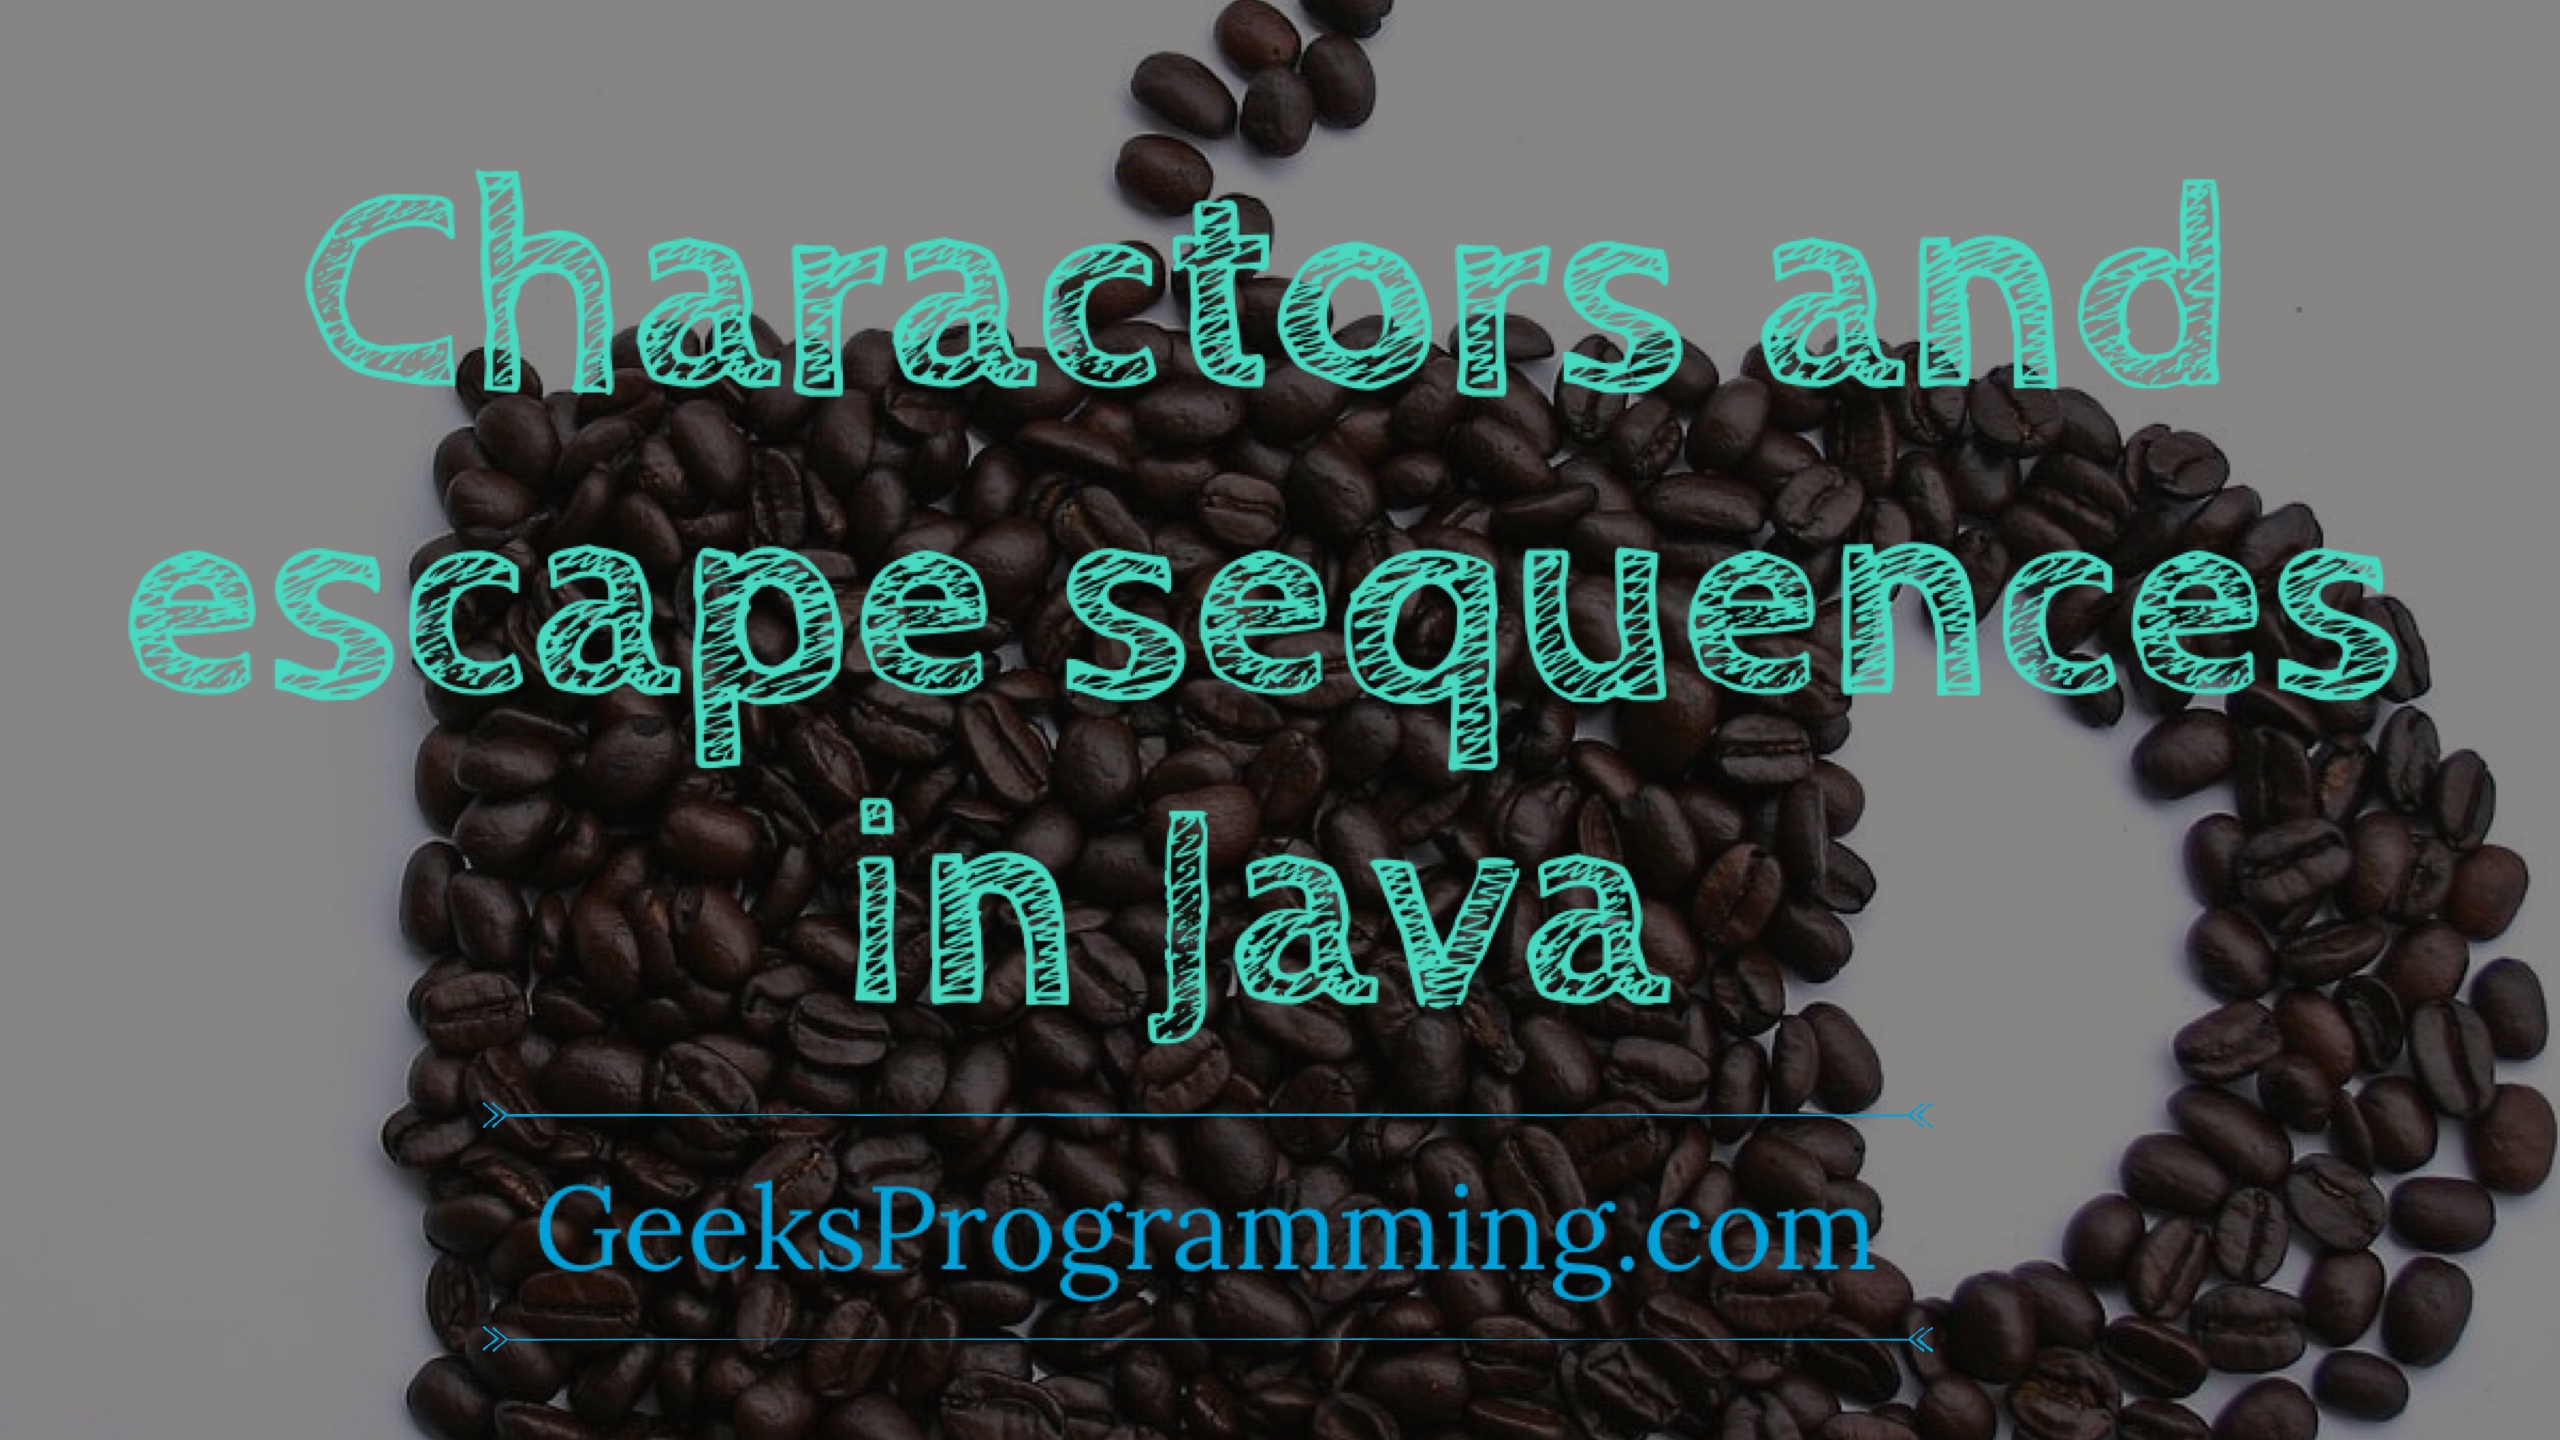  Charactors and escape sequences in java